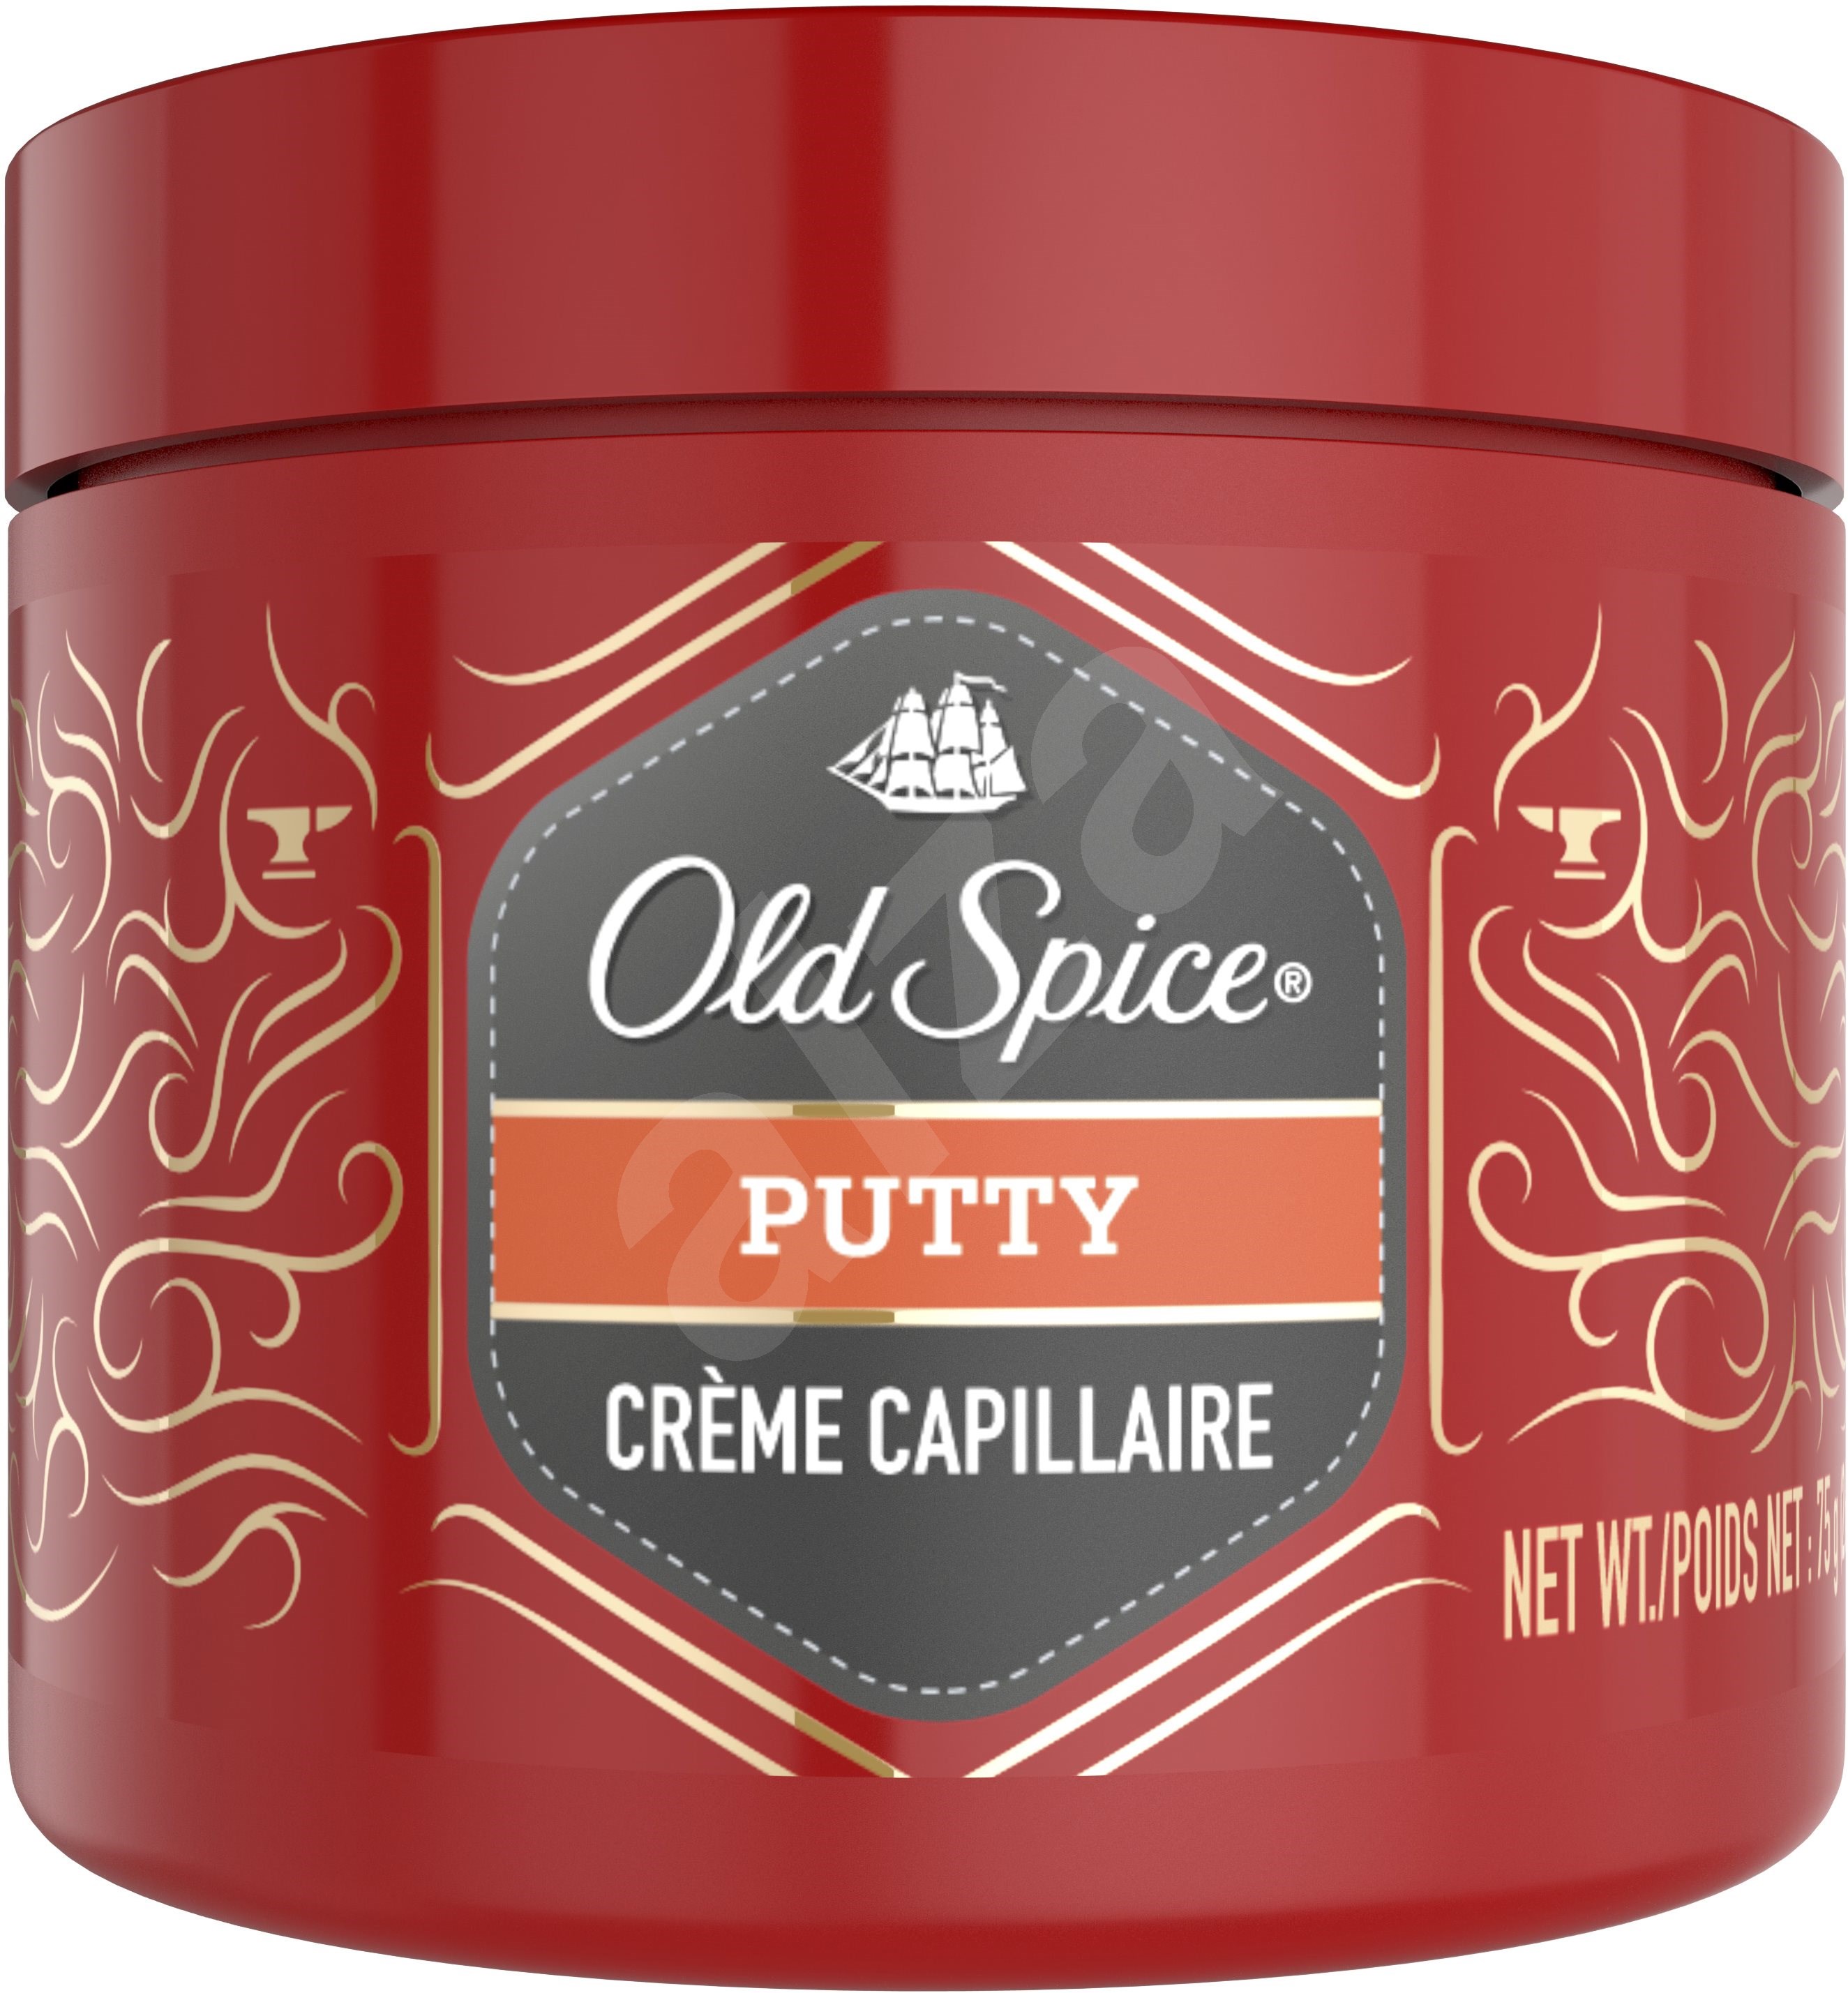 old spice putty pate coiffante